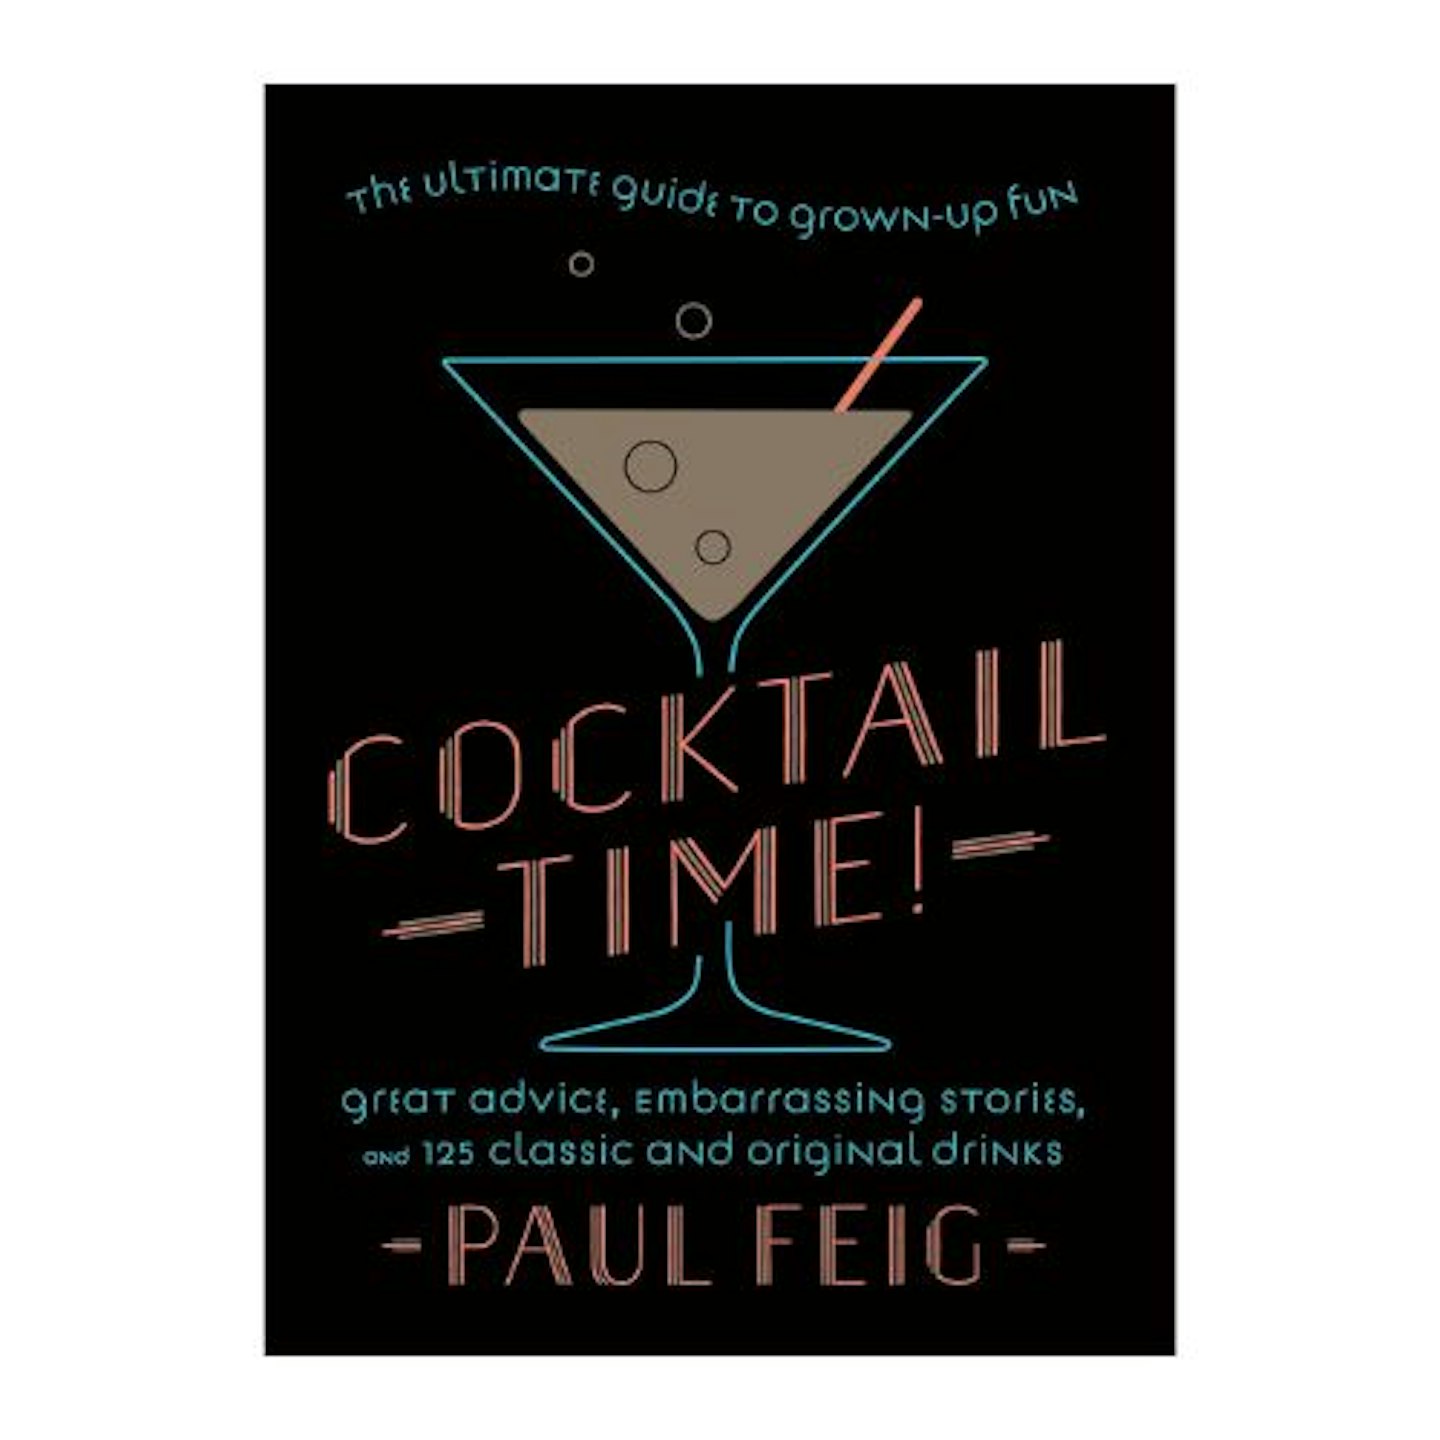 Cocktail Time!: The Ultimate Guide to Grown-Up Fun